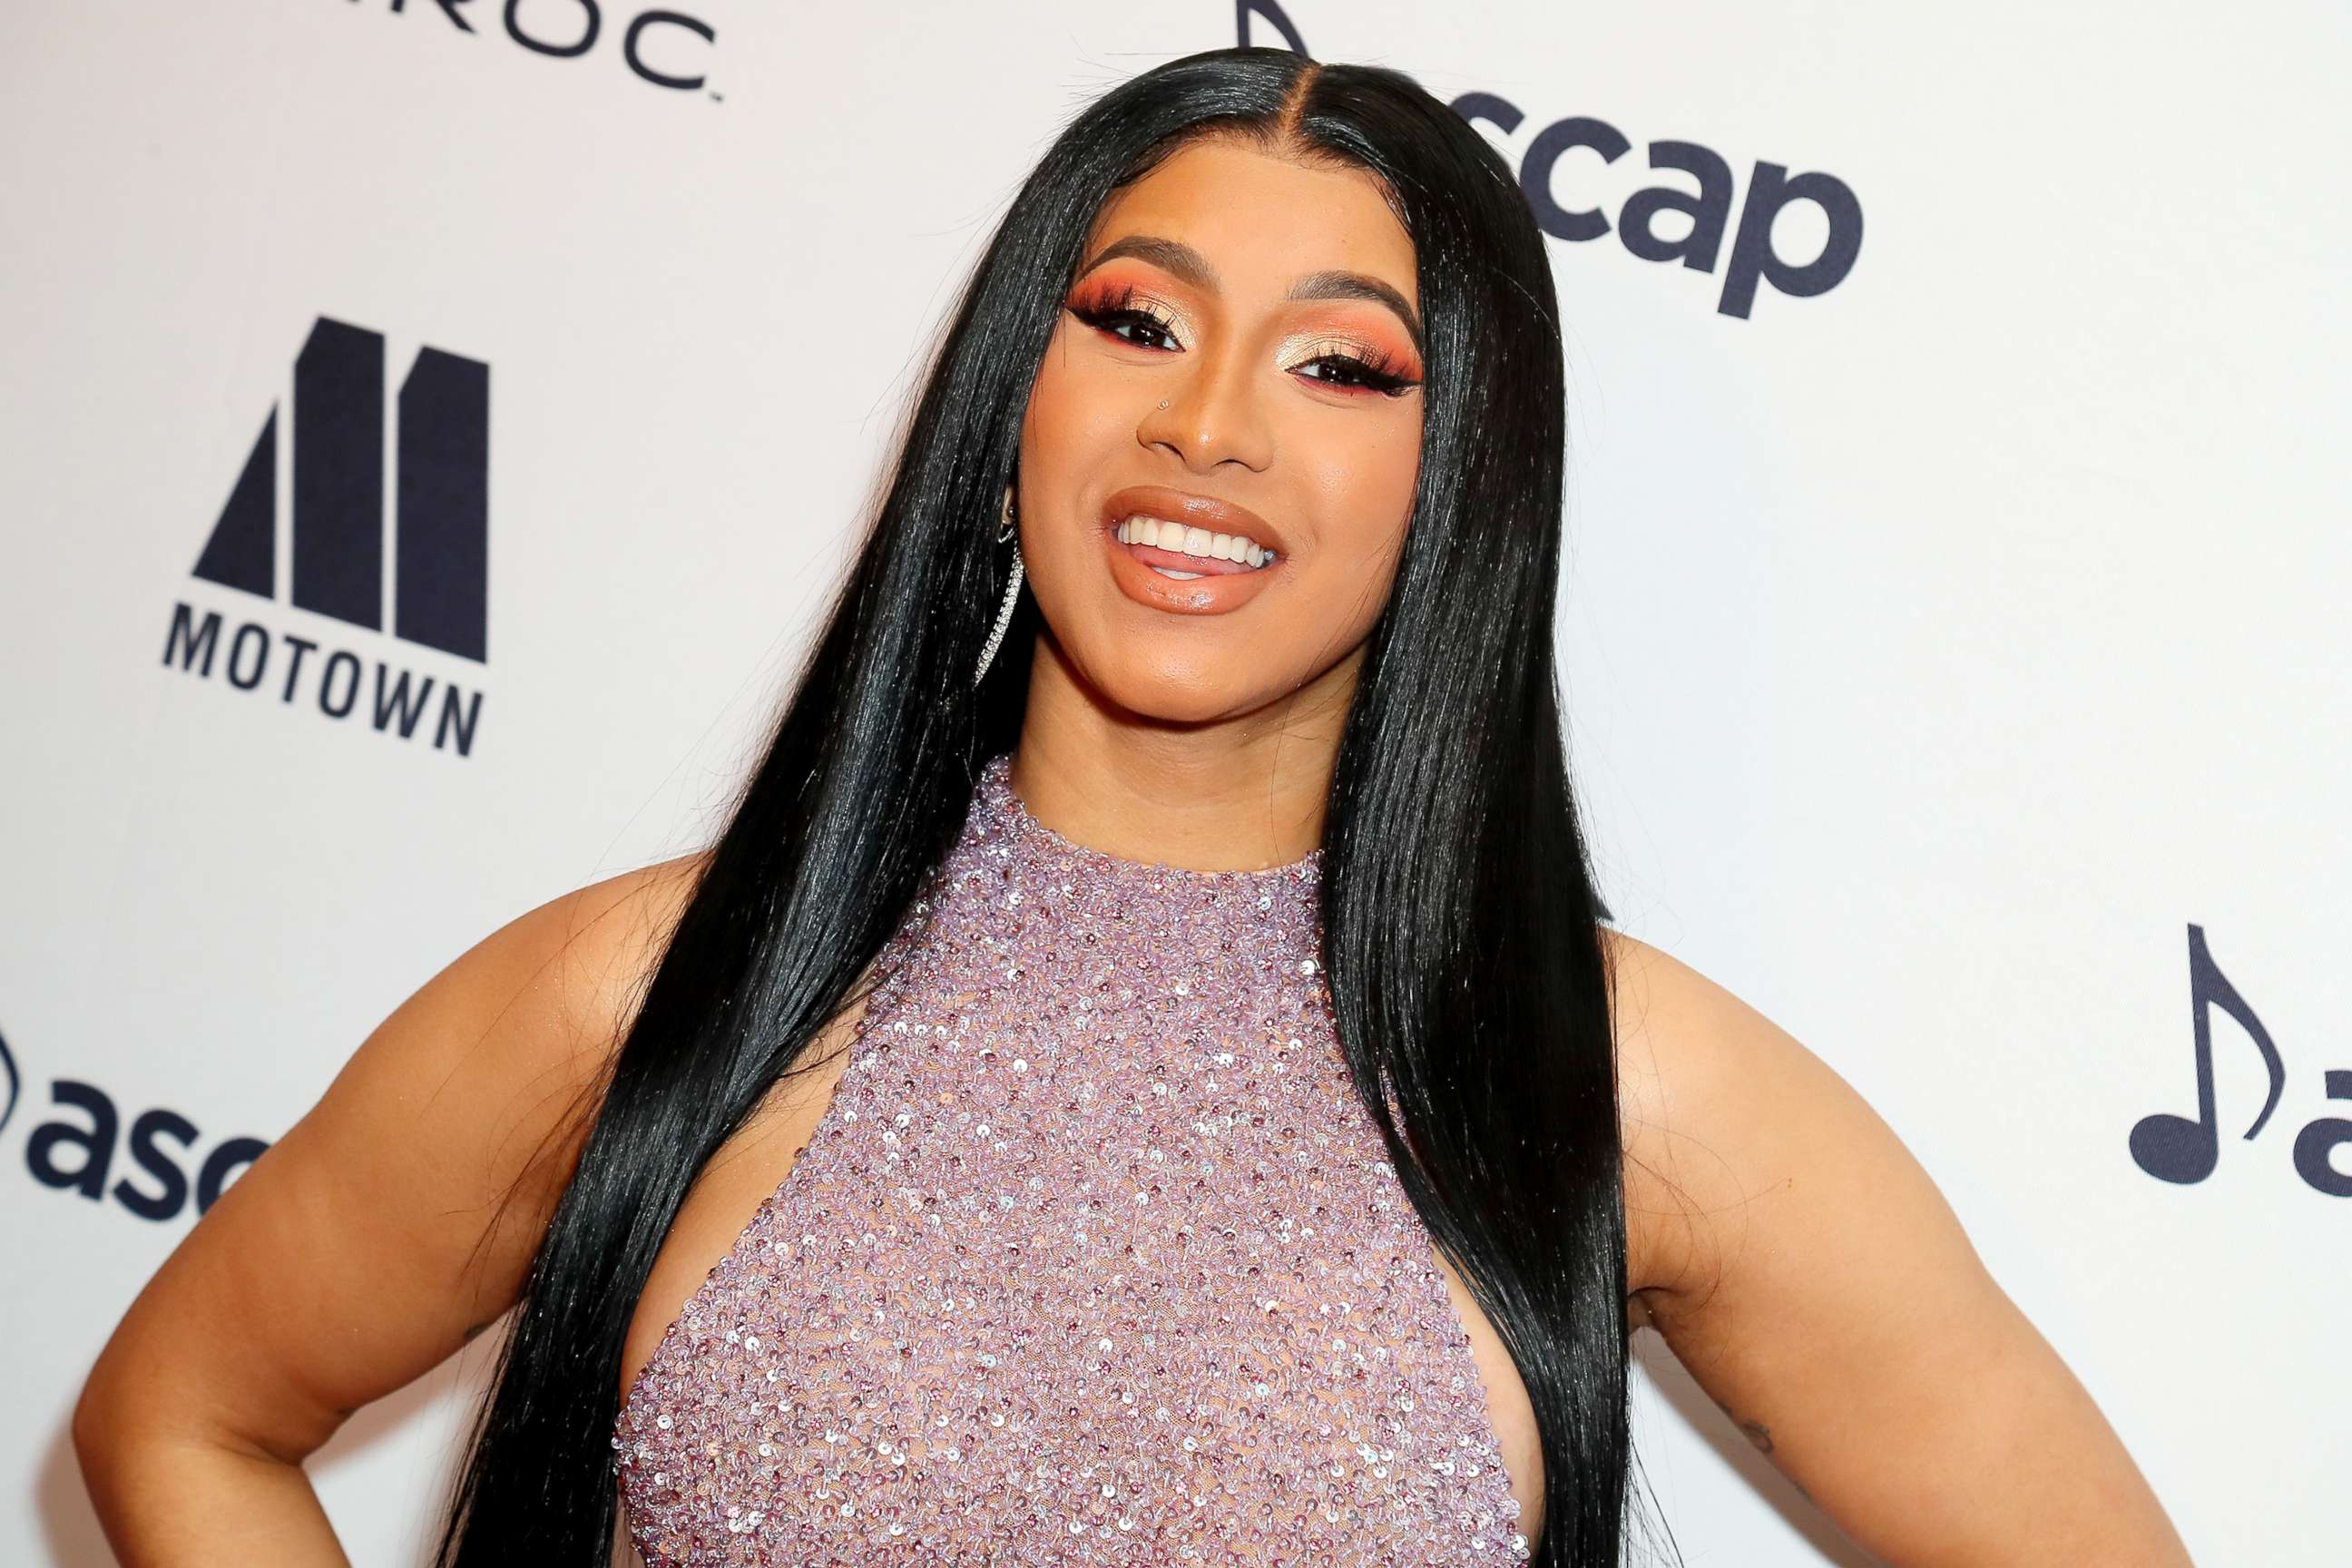 Cardi B selected to host 2021 American Music Awards show